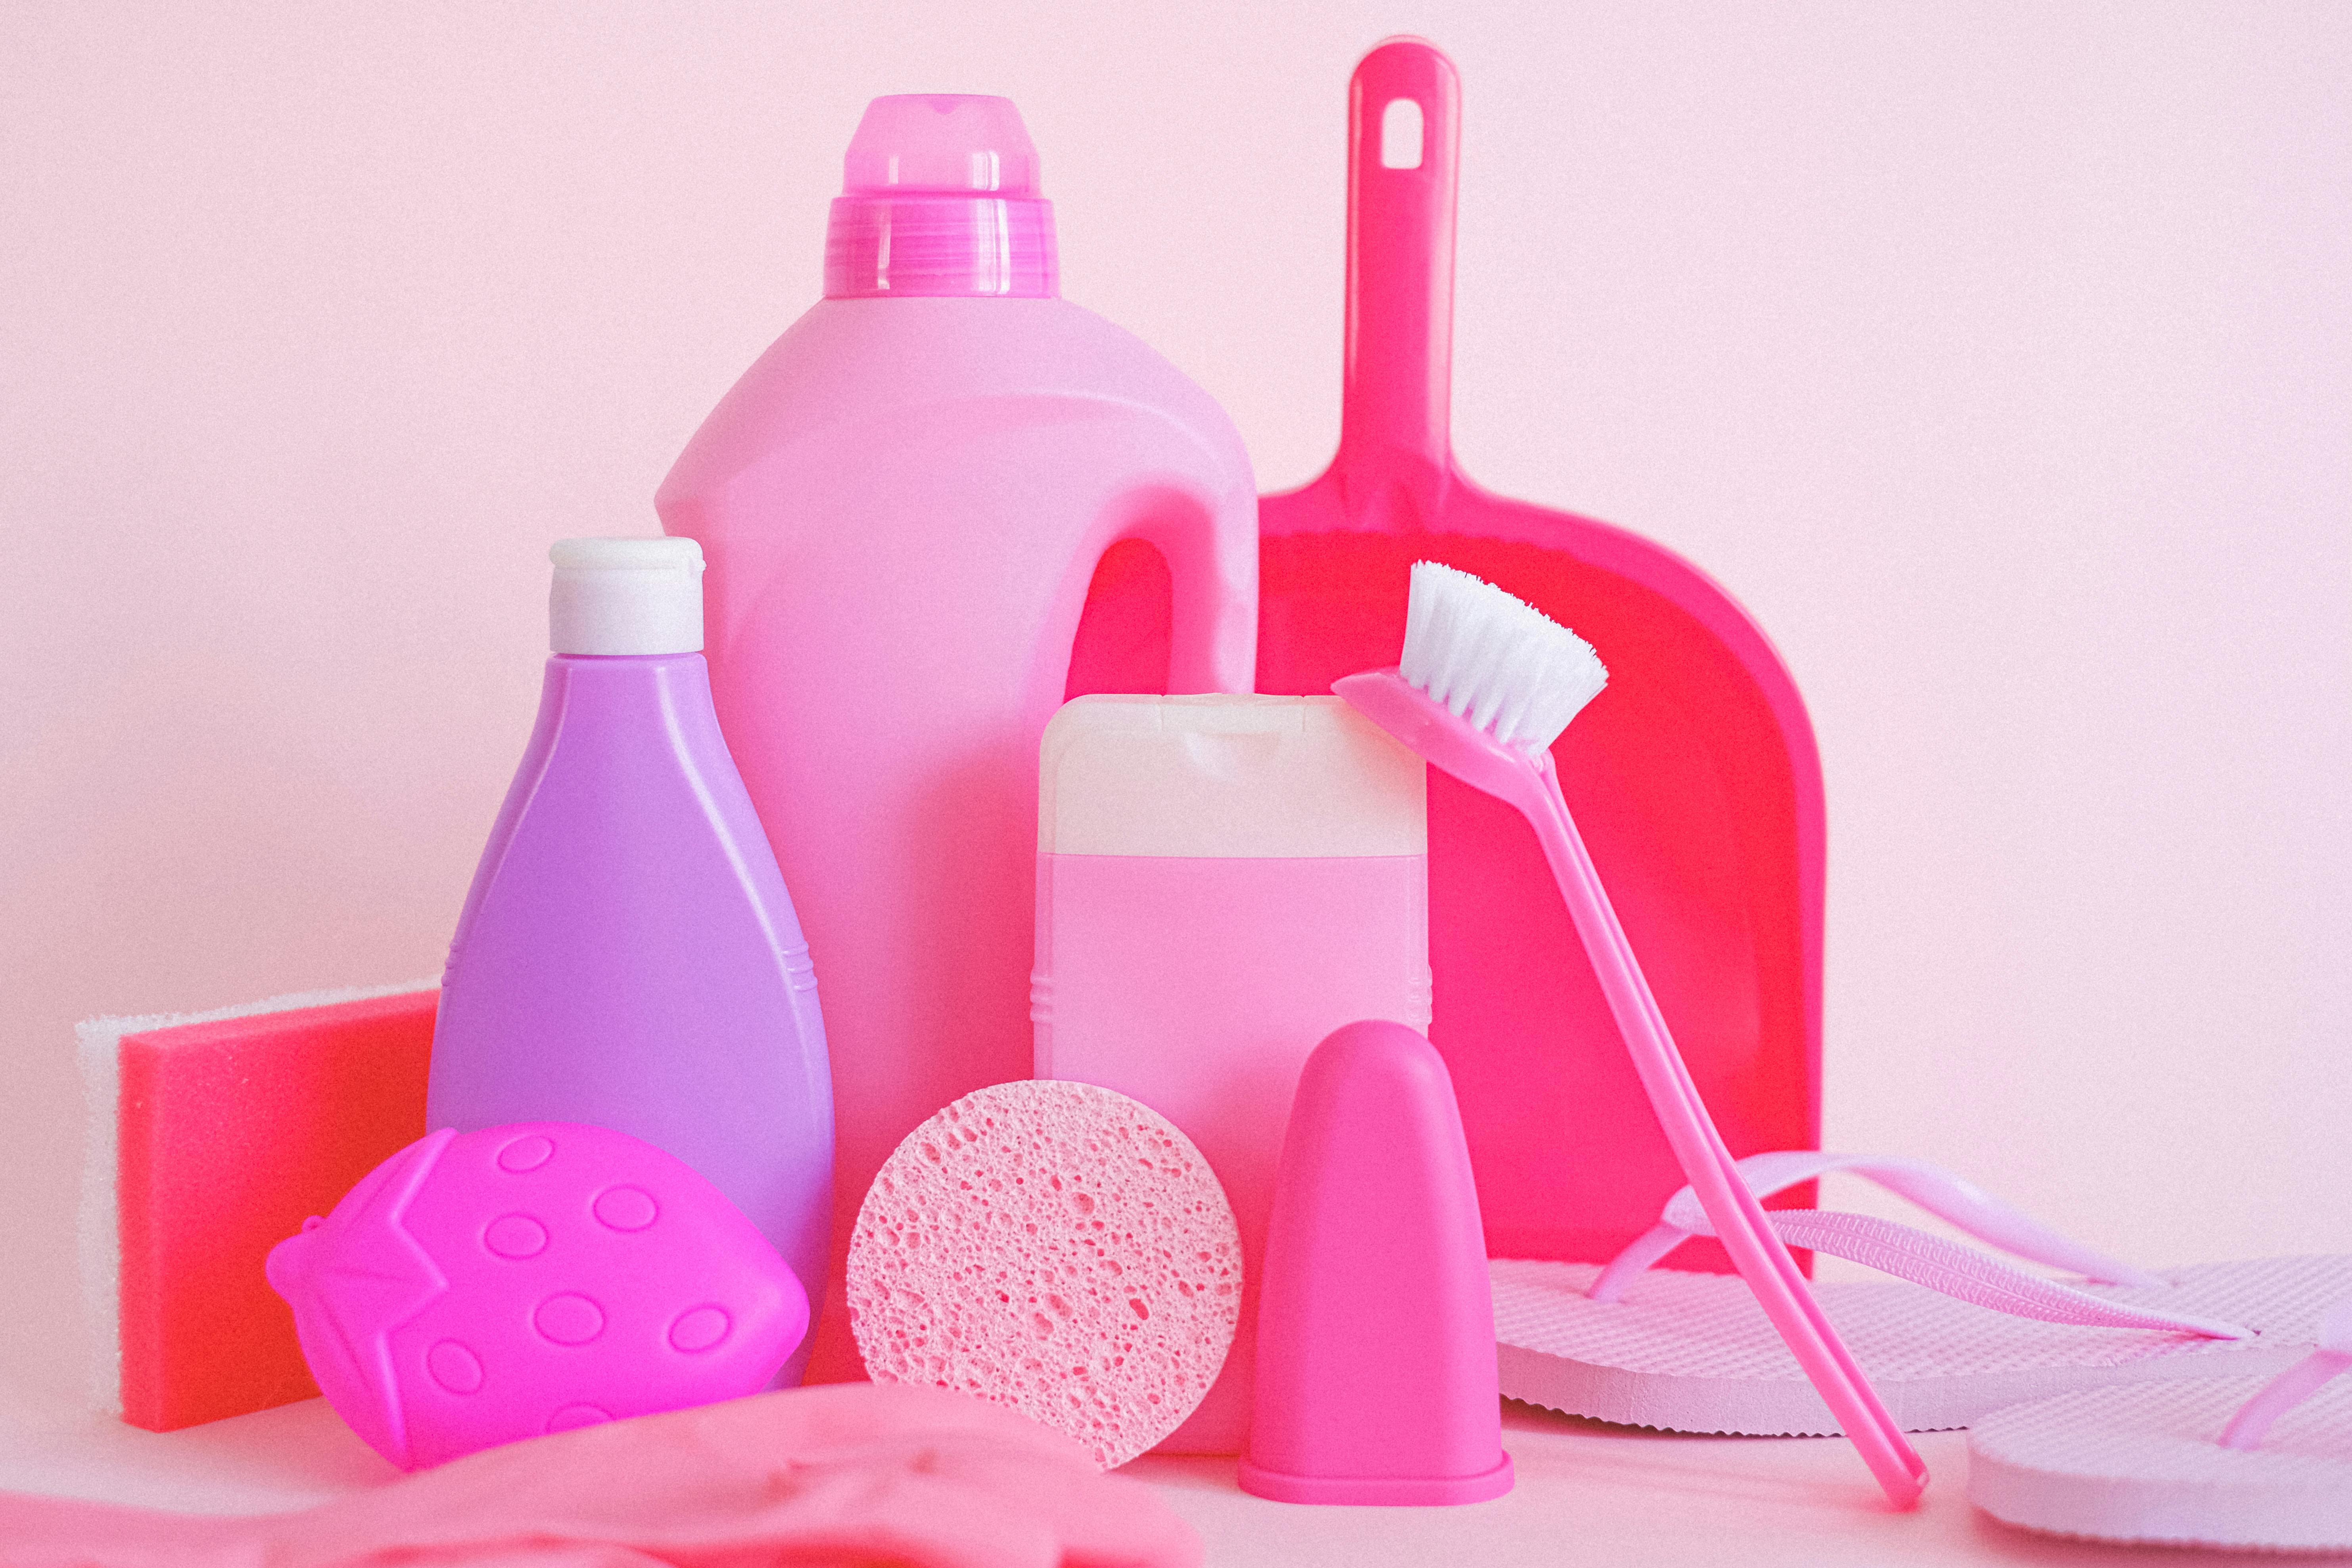 House Cleaning Products On Pink Background Stock Photo - Download Image Now  - Antiseptic, Border - Frame, Bottle - iStock